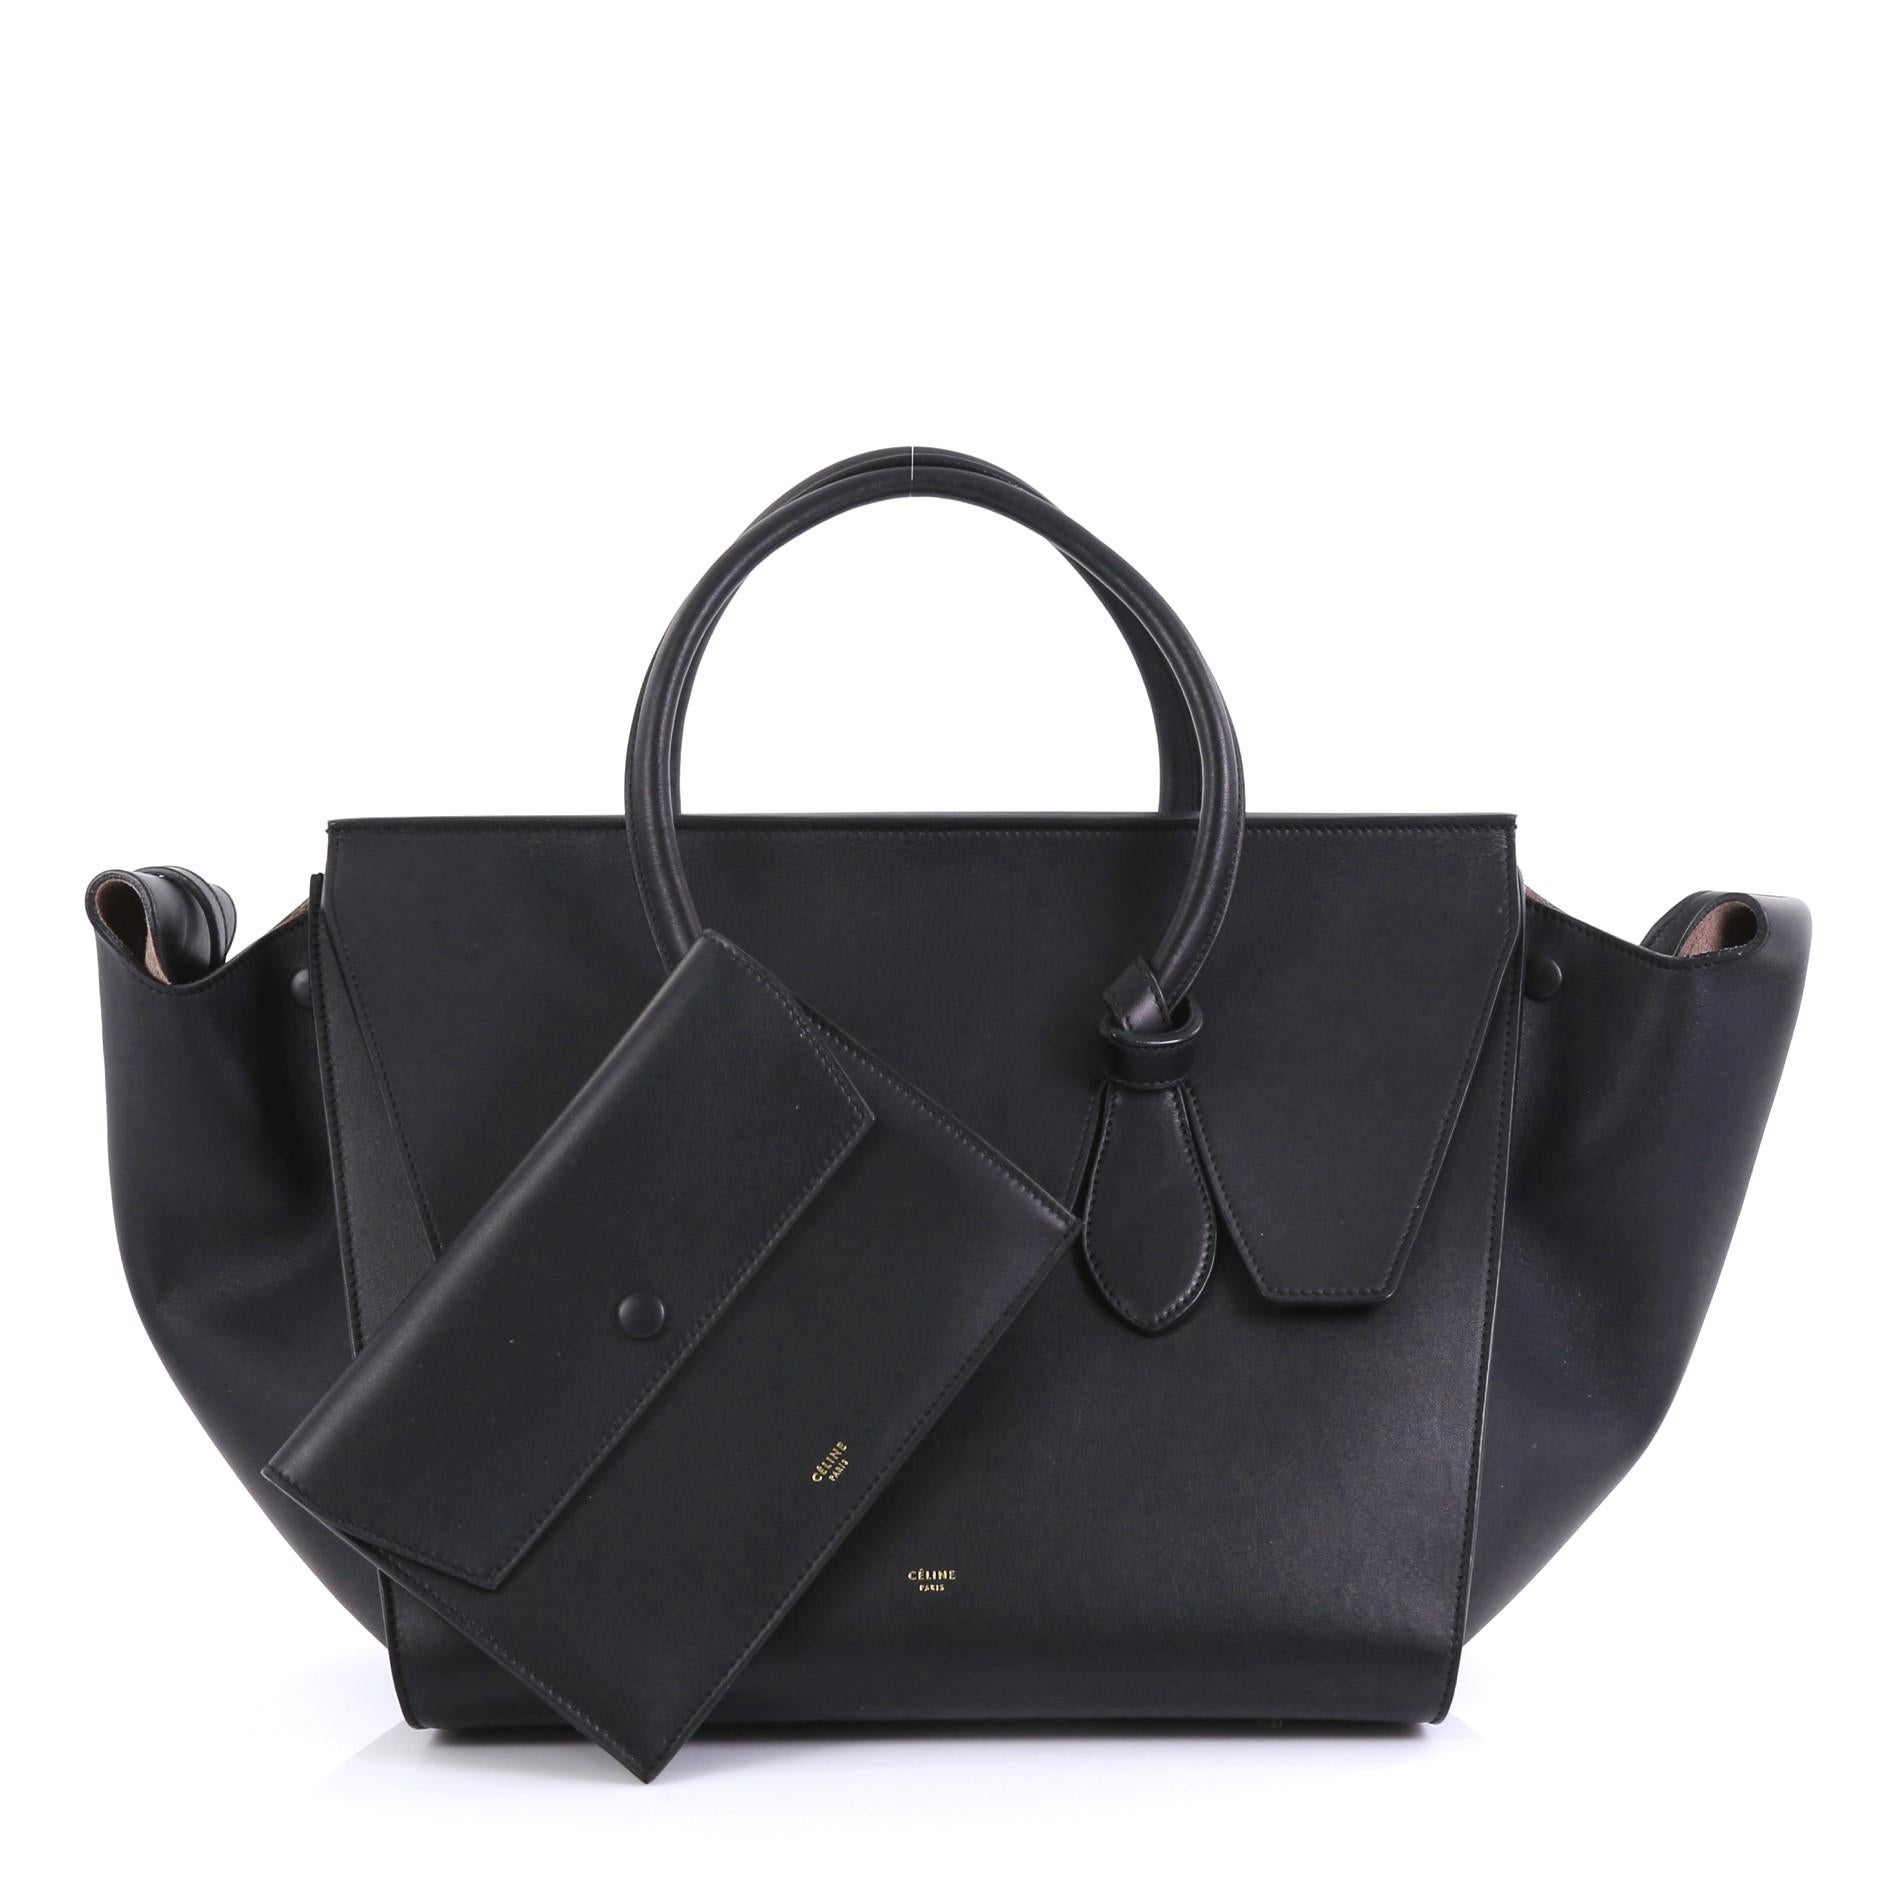 This Celine Tie Knot Tote Smooth Leather Medium, crafted from black smooth leather, features dual rolled leather handles with knot accents, protective base studs, expandable wings, and gold-tone hardware. Its flap that can be tucked inside opens to